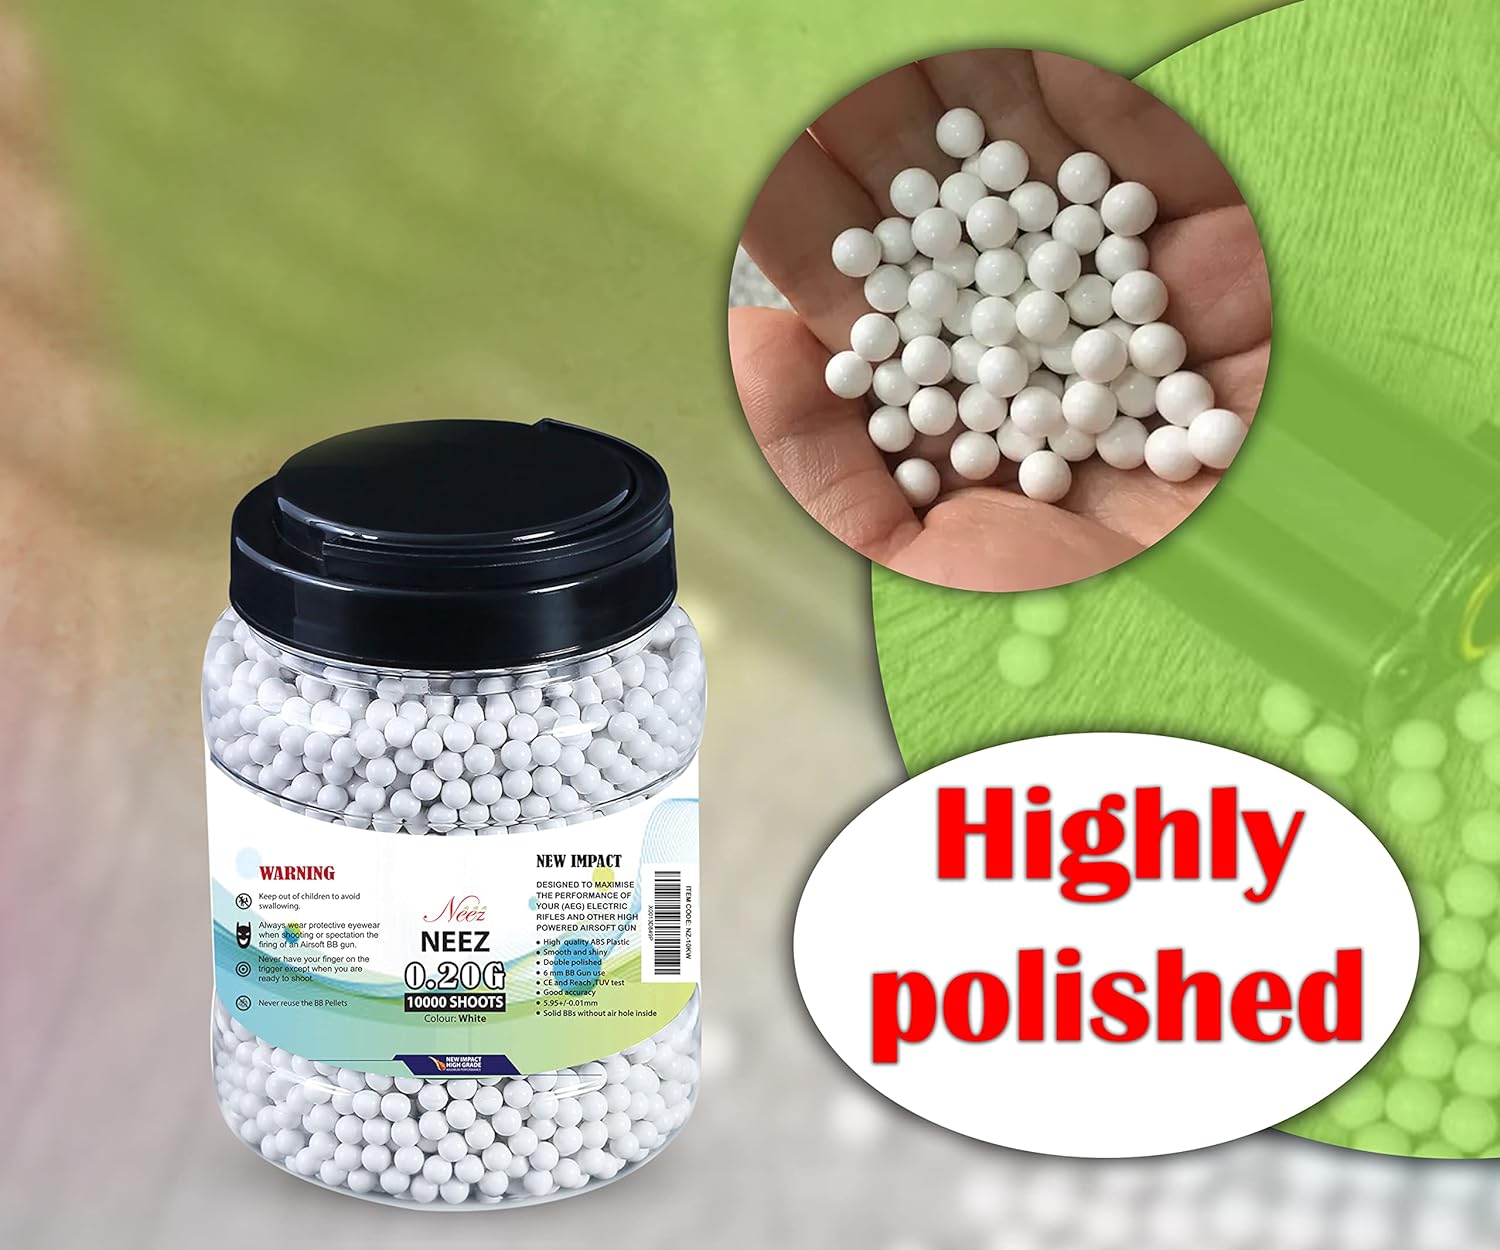 Airsoft BB Pellets 6mm BBs 0.20g High Grade and Smooth Polished Plastic Paintballs Content (10000 Shots)